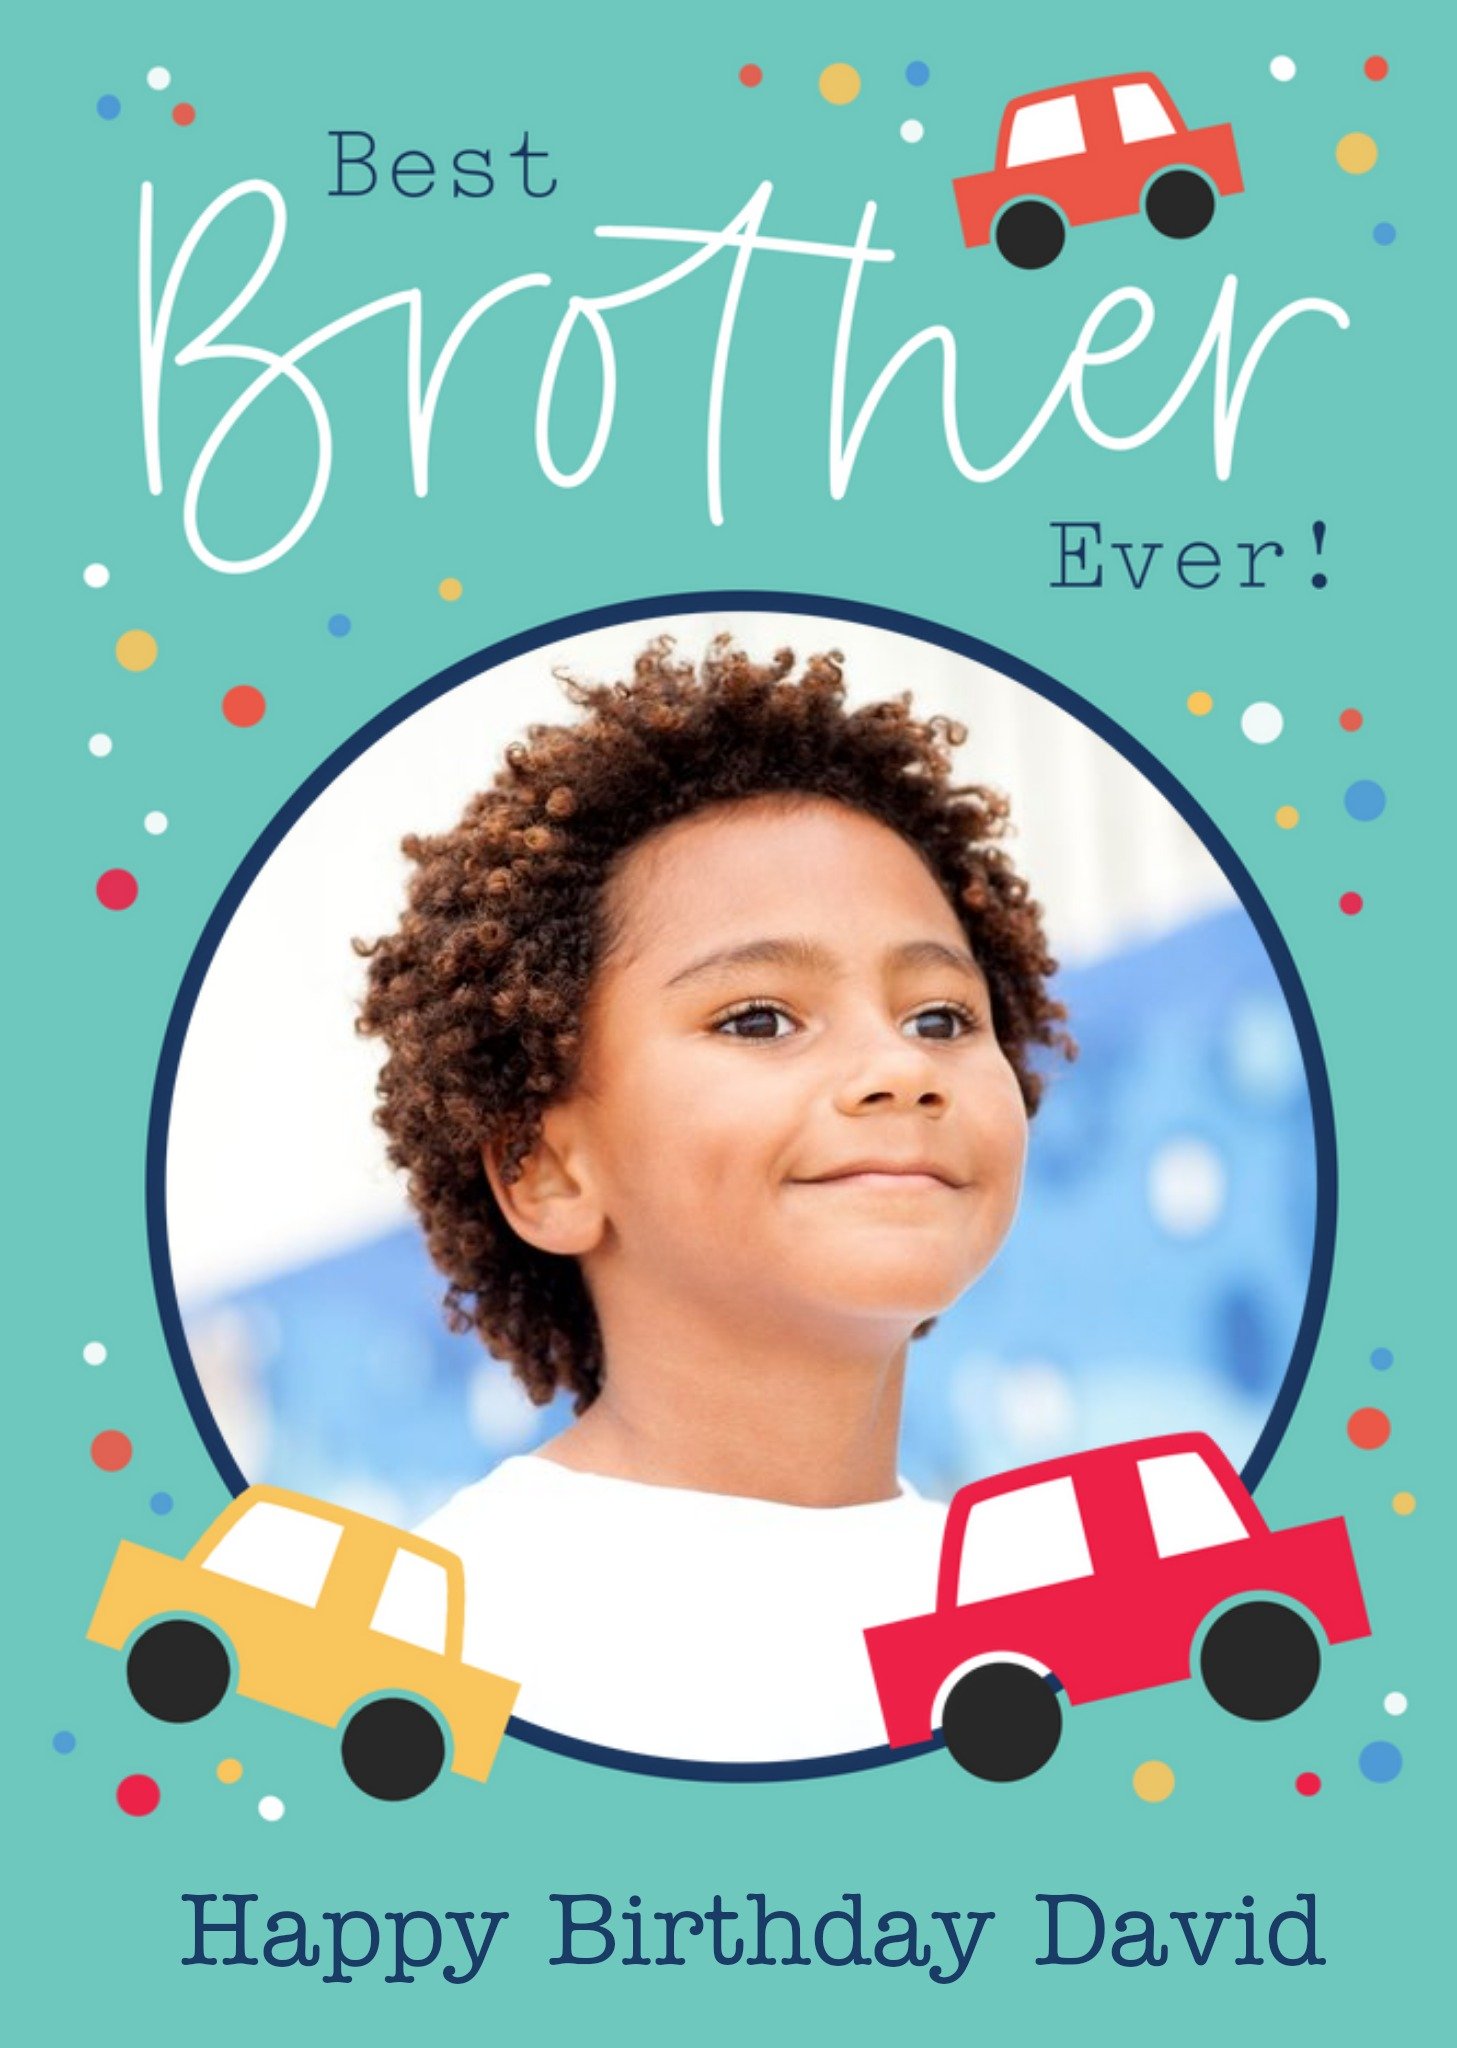 Moonpig Best Brother Ever Photo Upload Birthday Card, Large